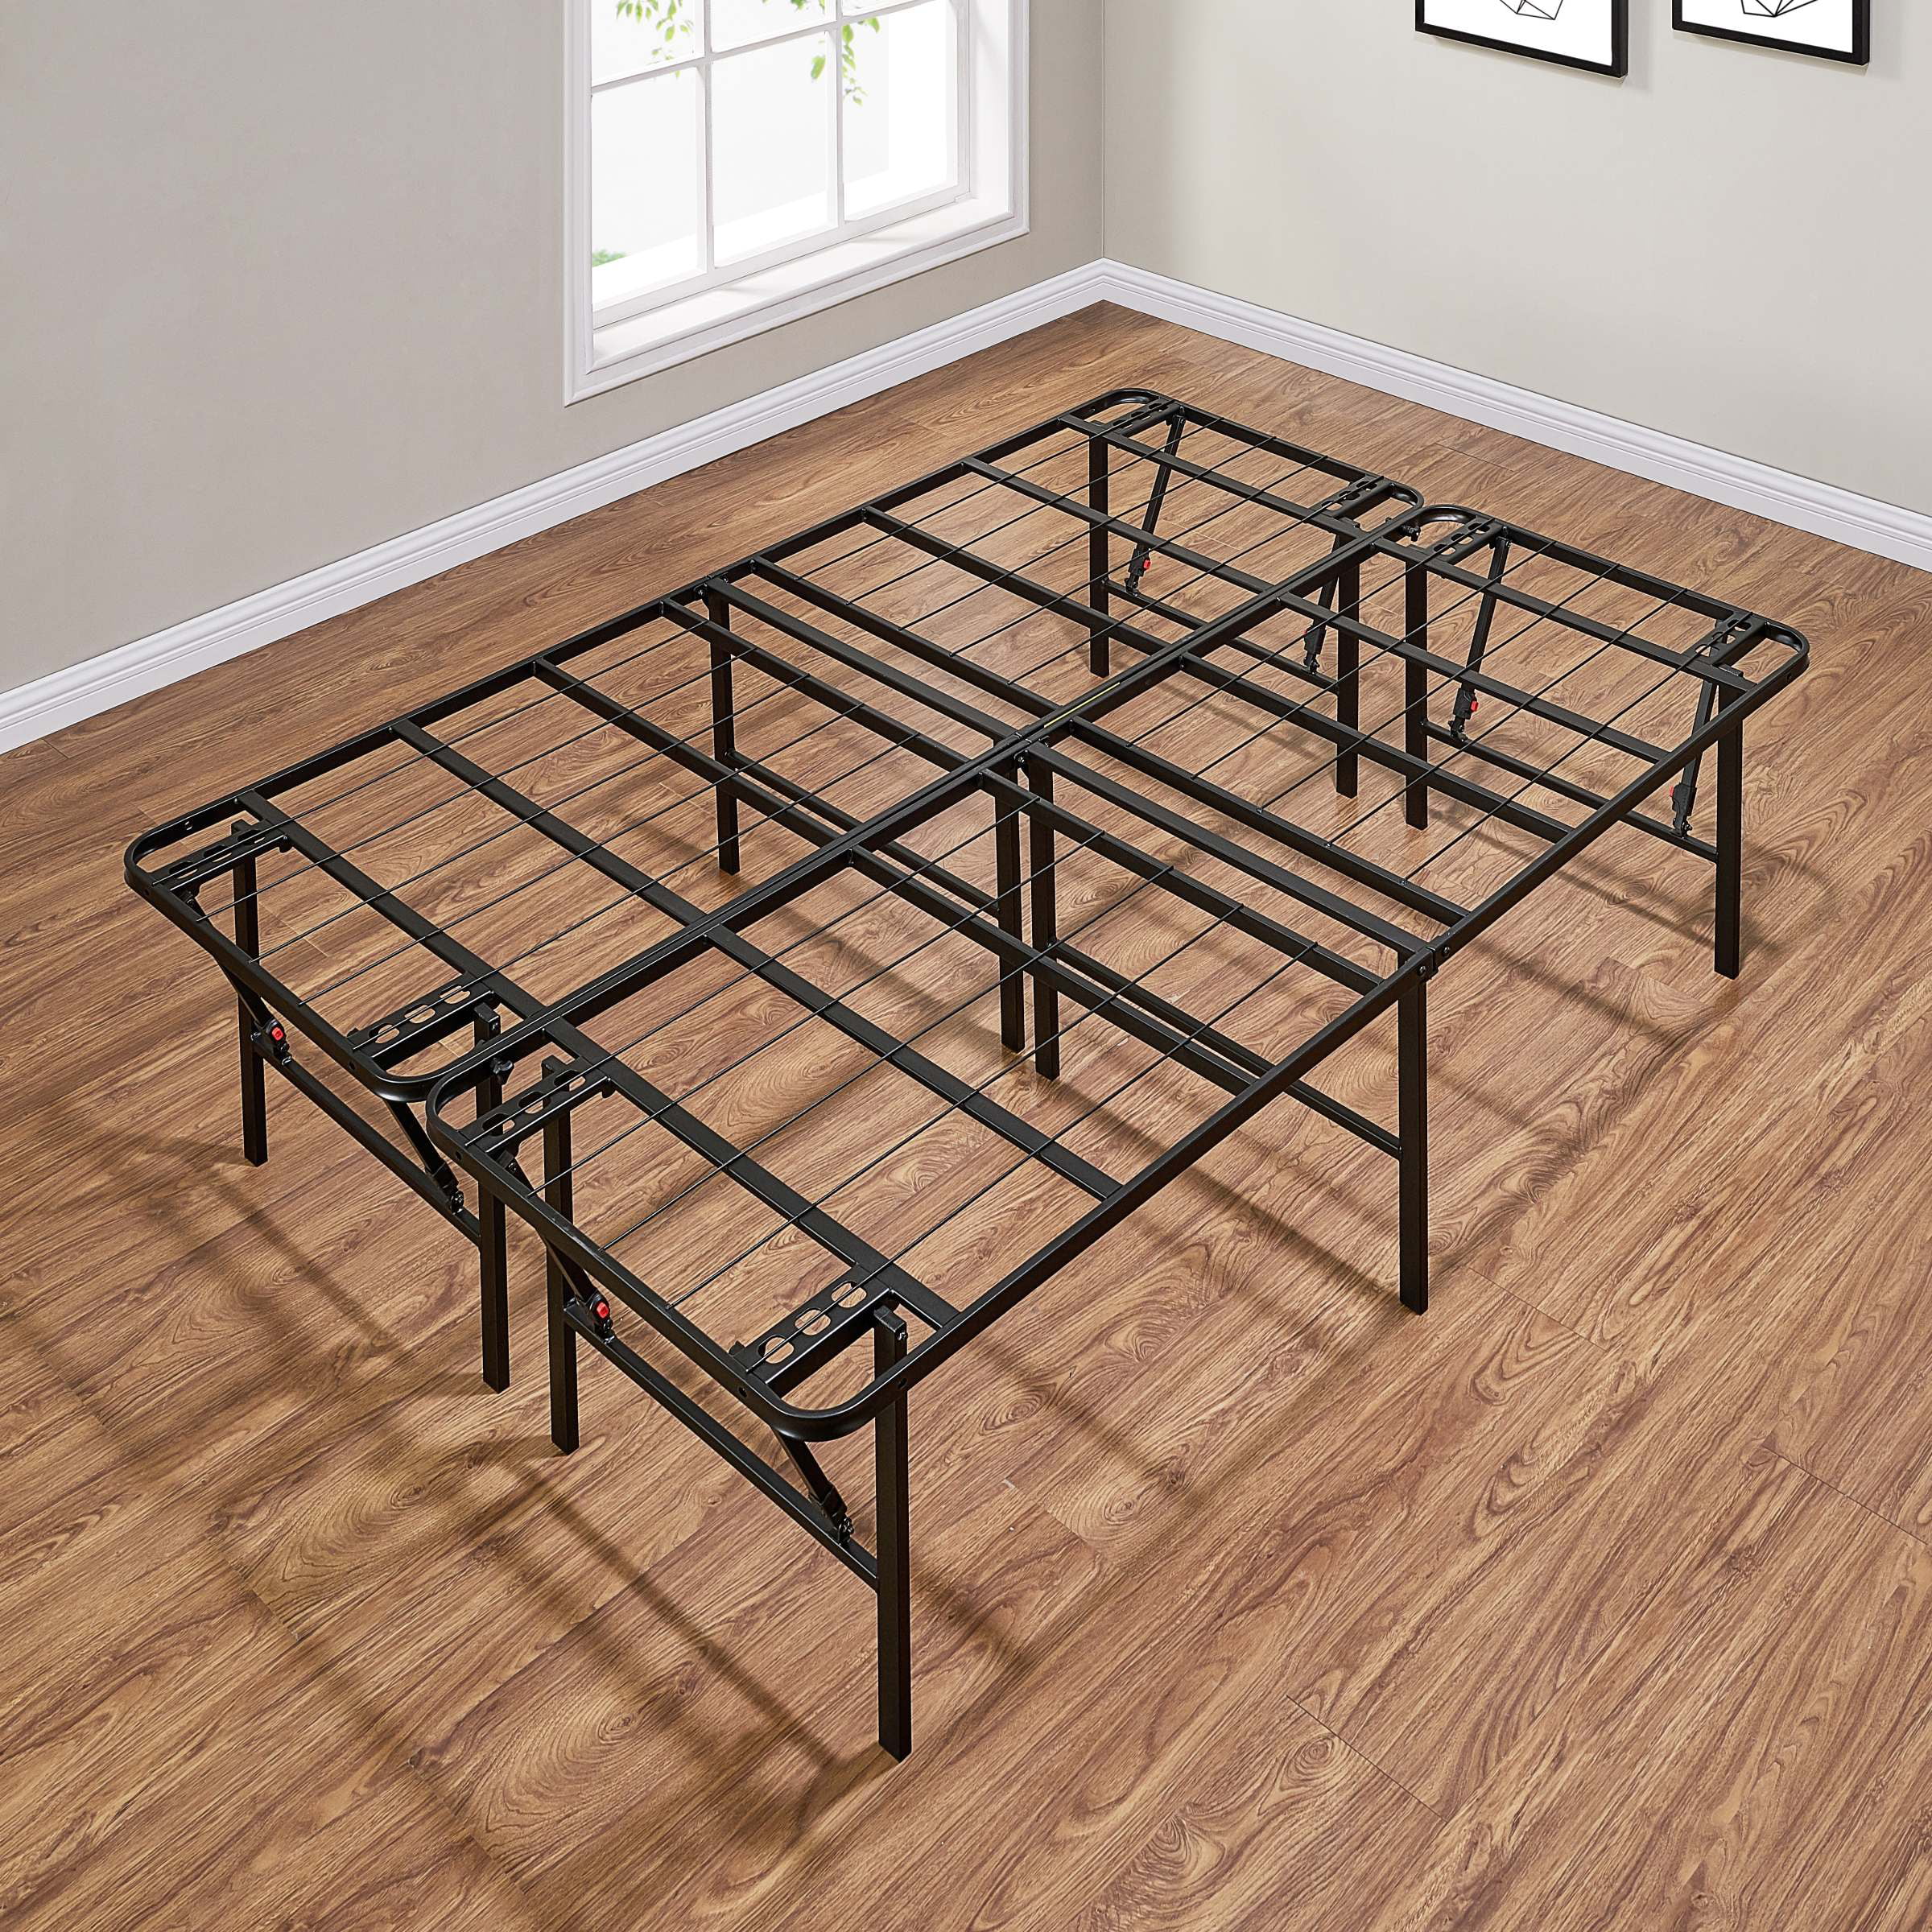 Steel Platform BED FRAME Queen Size Metal Foldable 18 in High Profile heavy Duty 